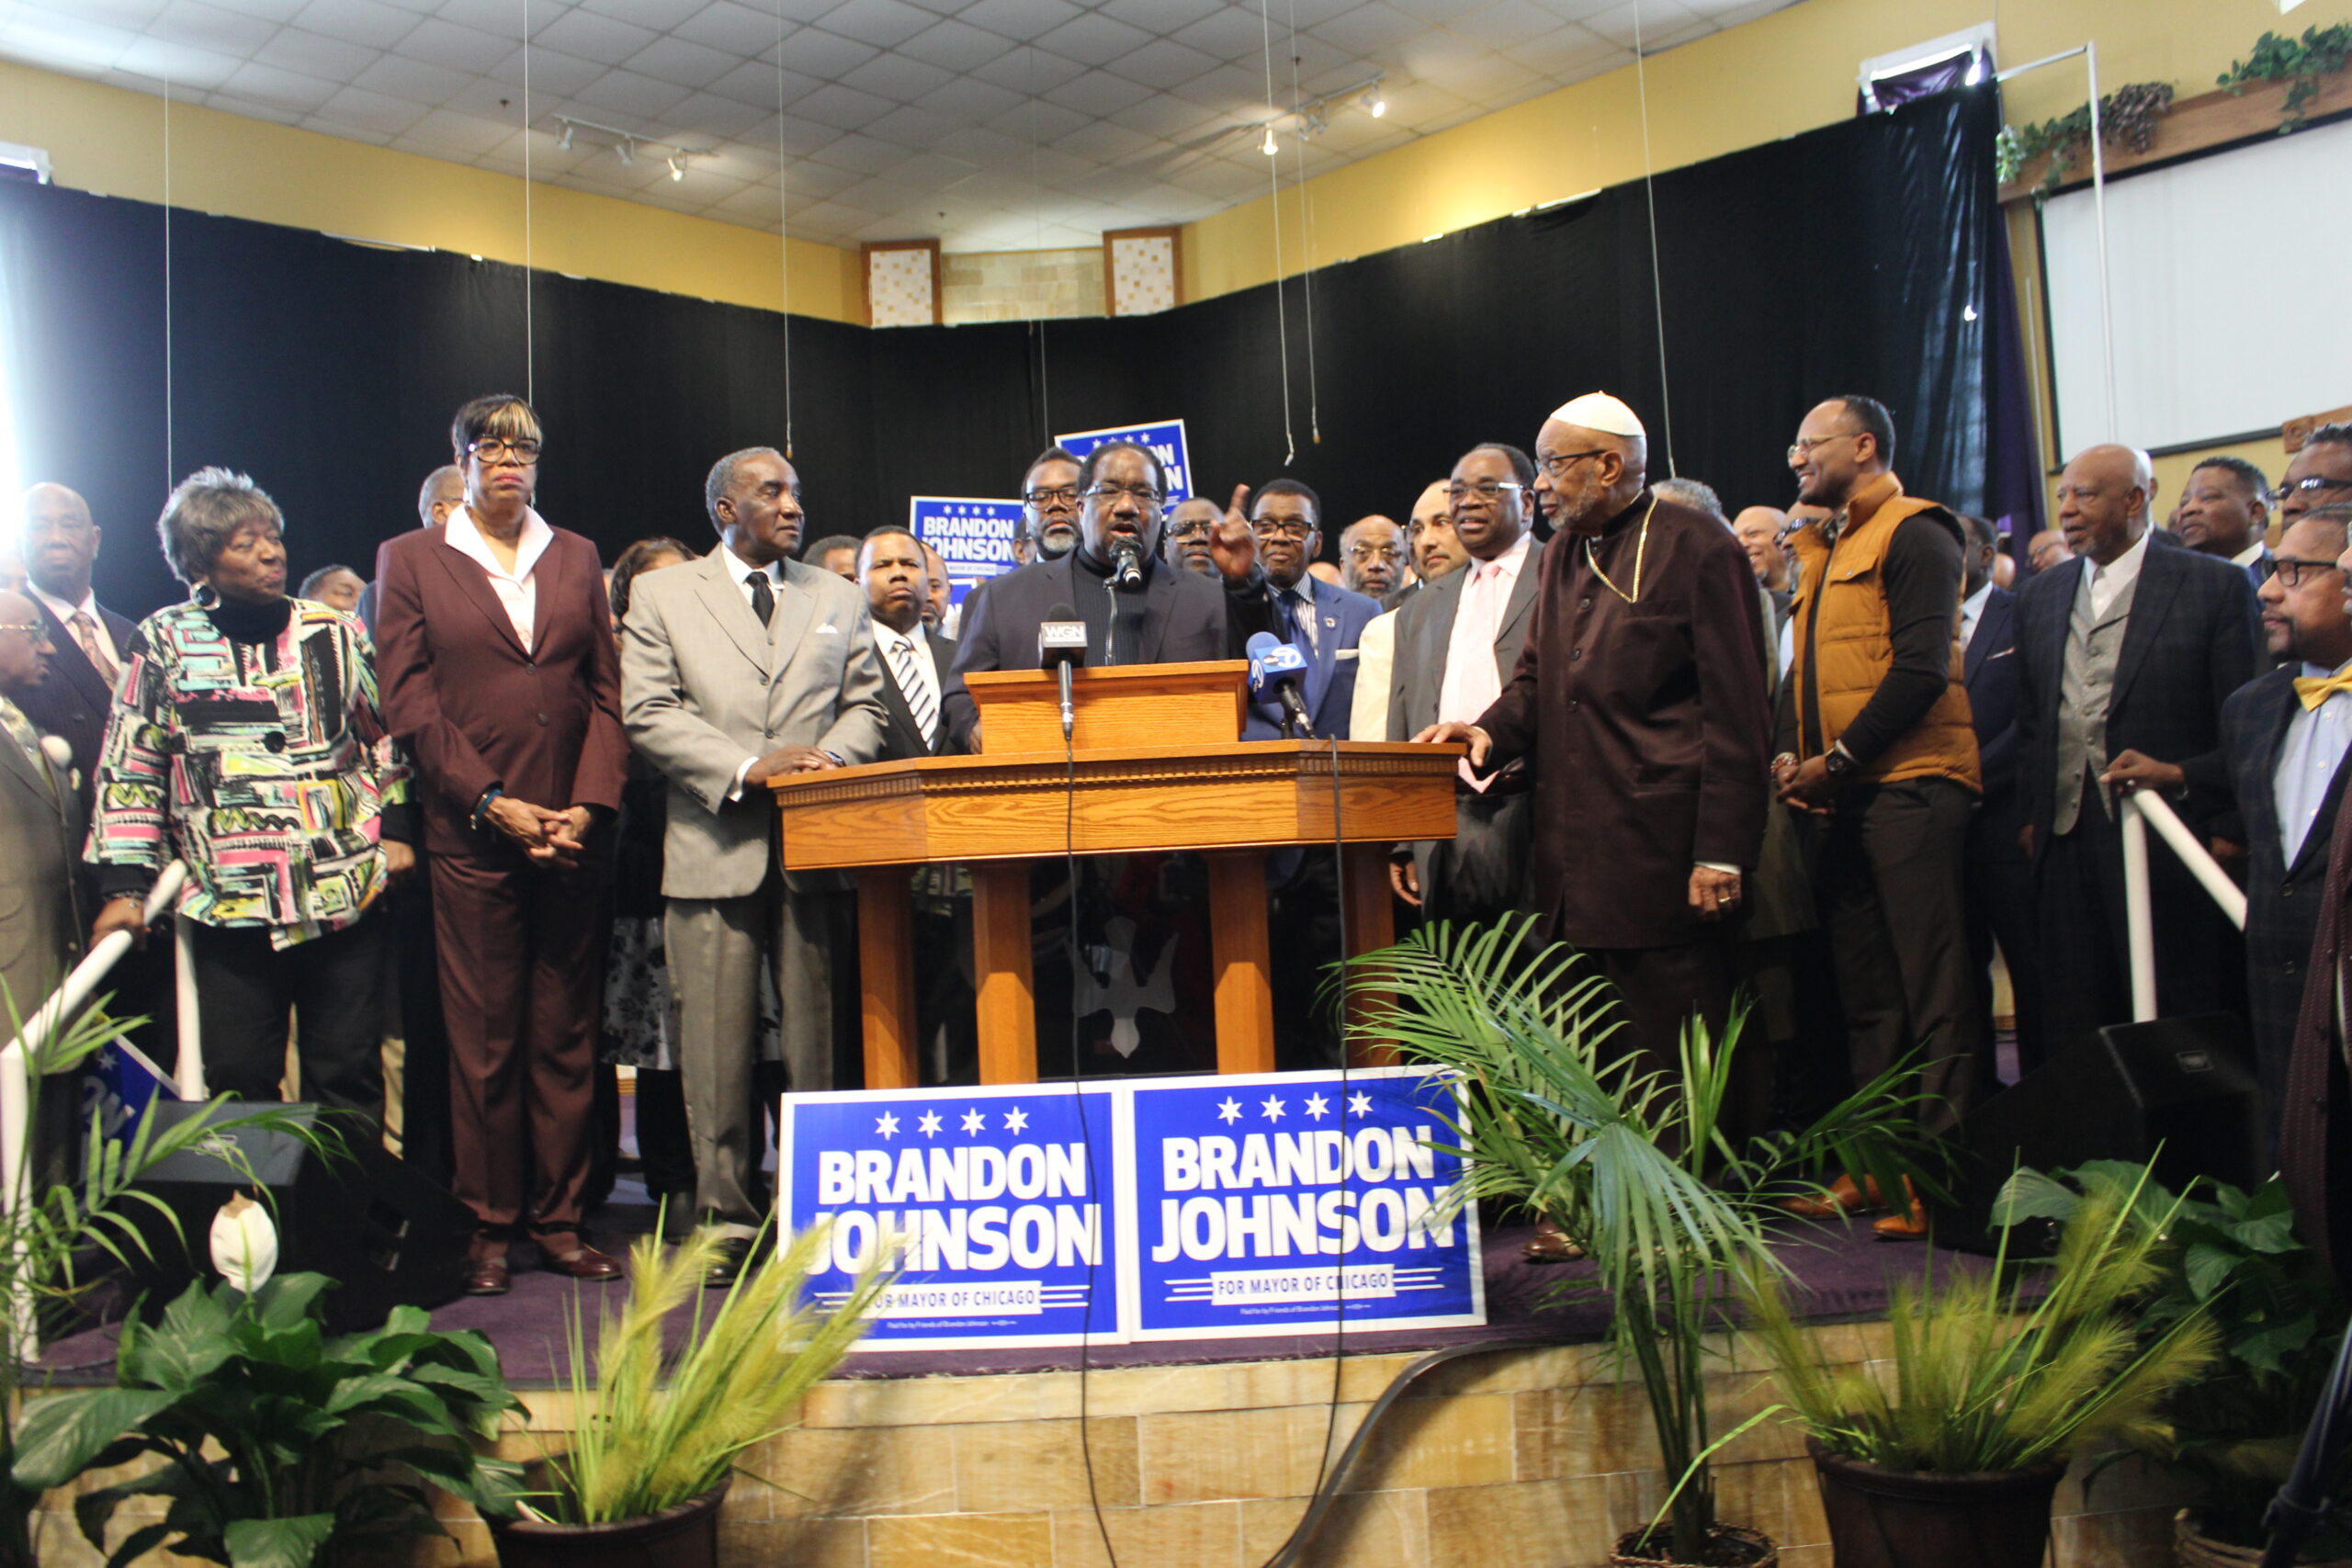 REV. MARSHALL HATCH at the podium of an event hosted by mayoral candidate Brandon Johnson explaining why he fired Paul Vallas. (Photo by Chinta Strausberg)